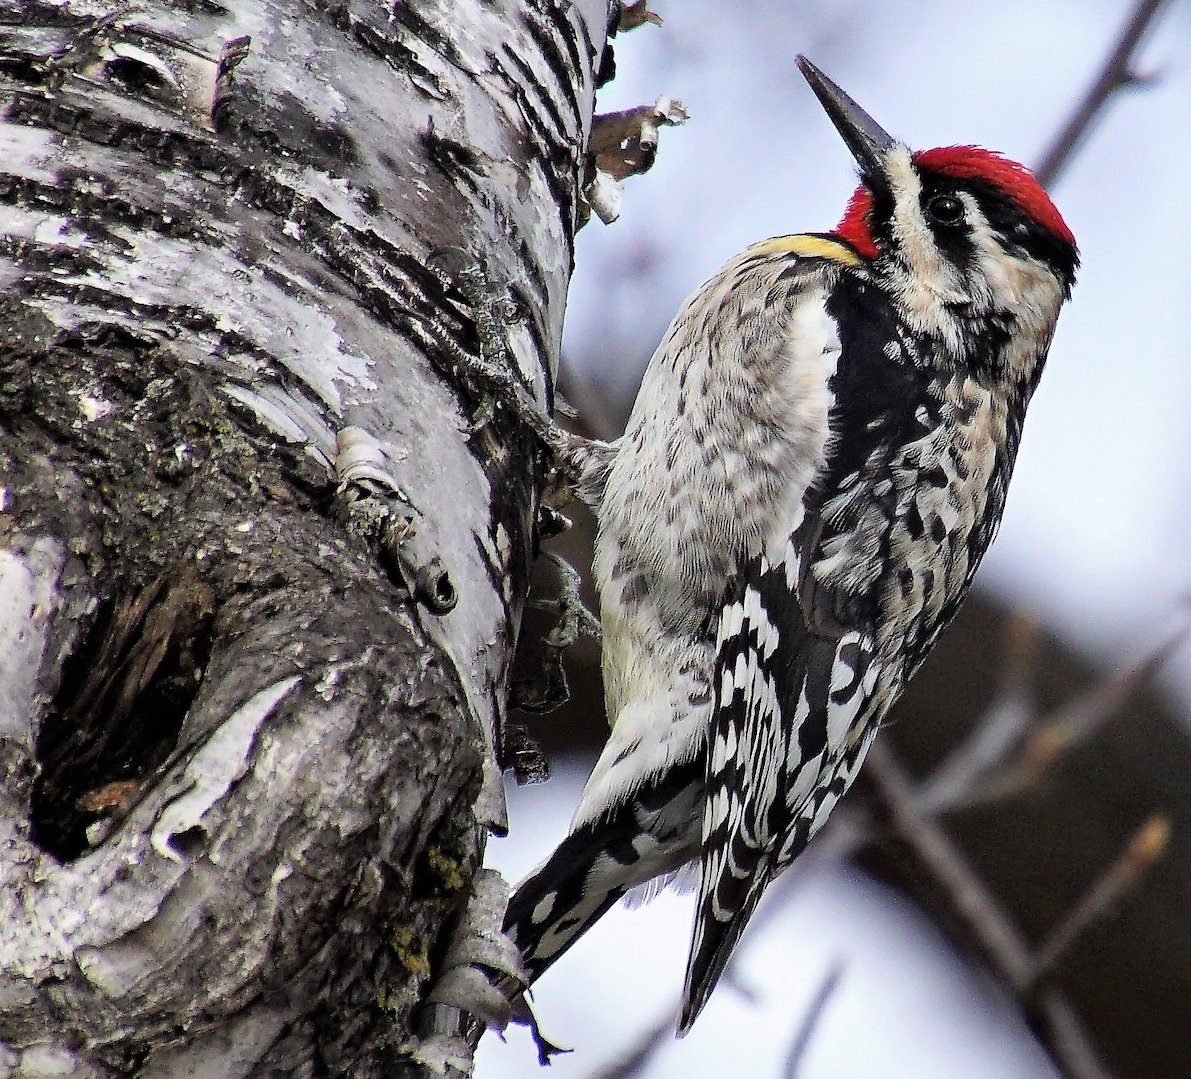 Sapsucker Birds: Woodpeckers With a Sweet Tooth